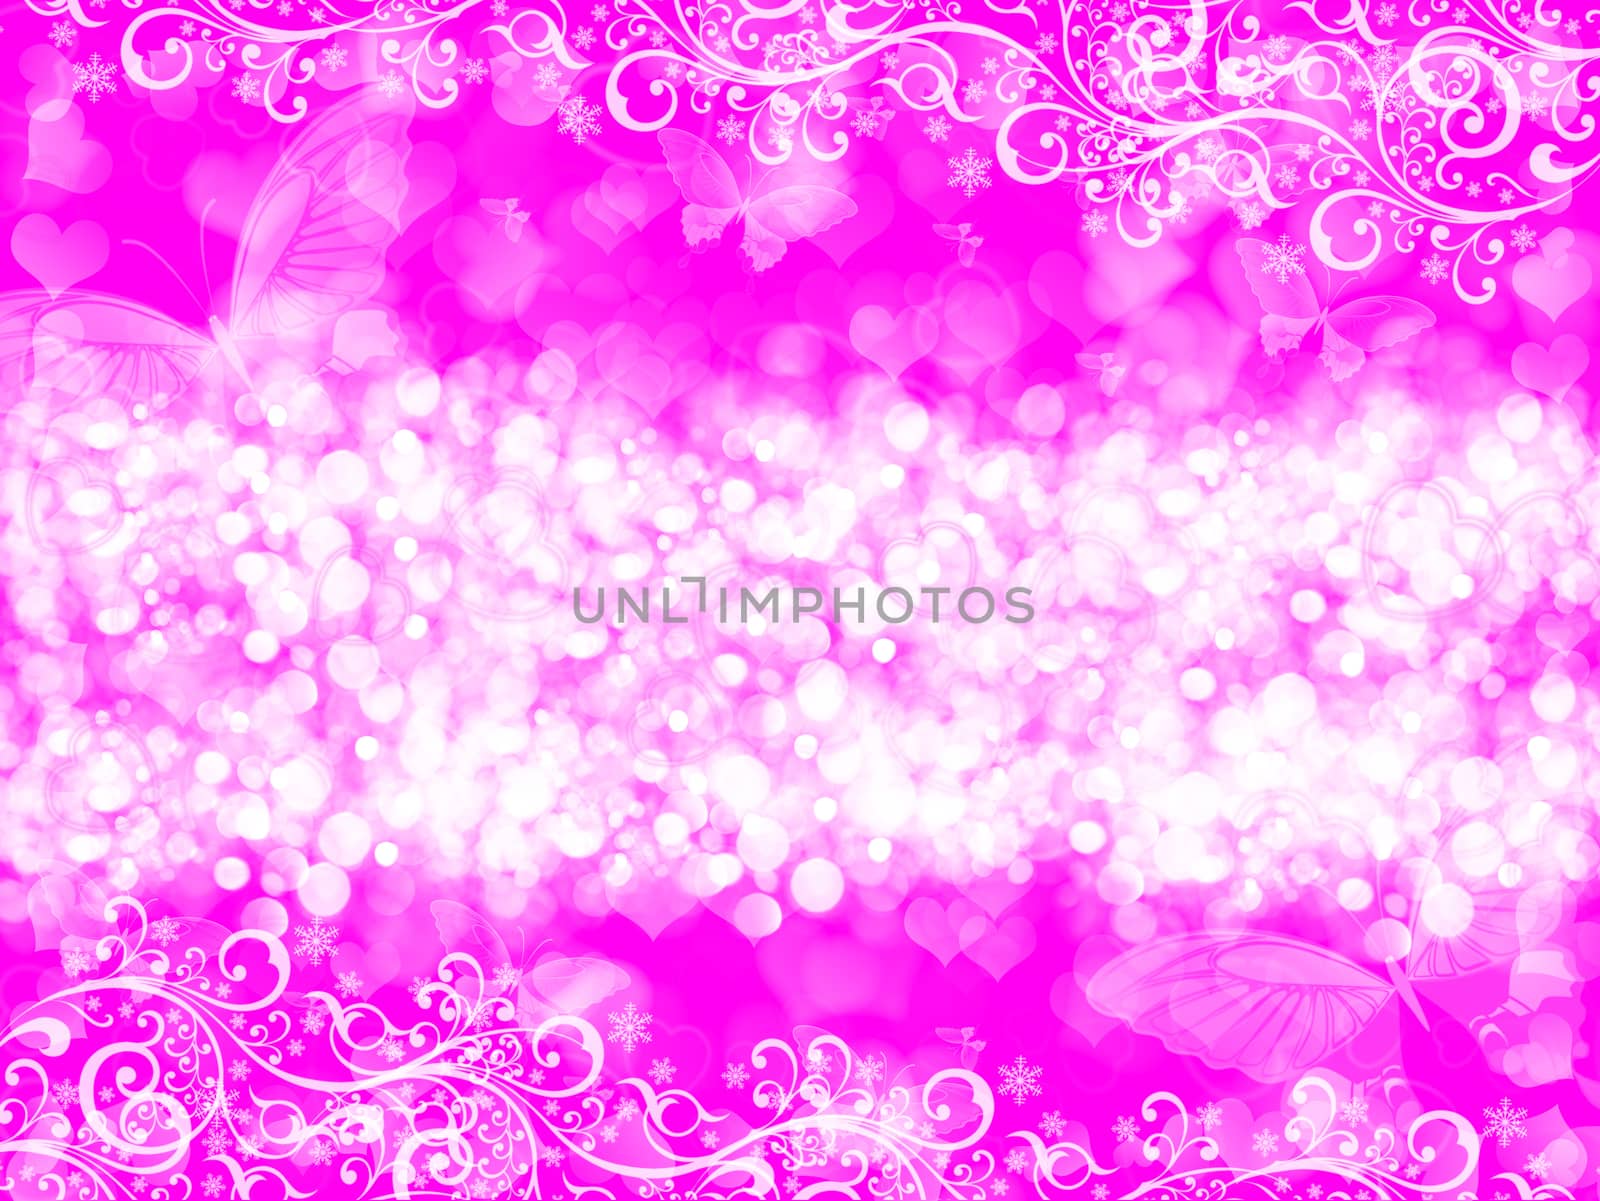 diffuse background, pink colors, bokeh effect.